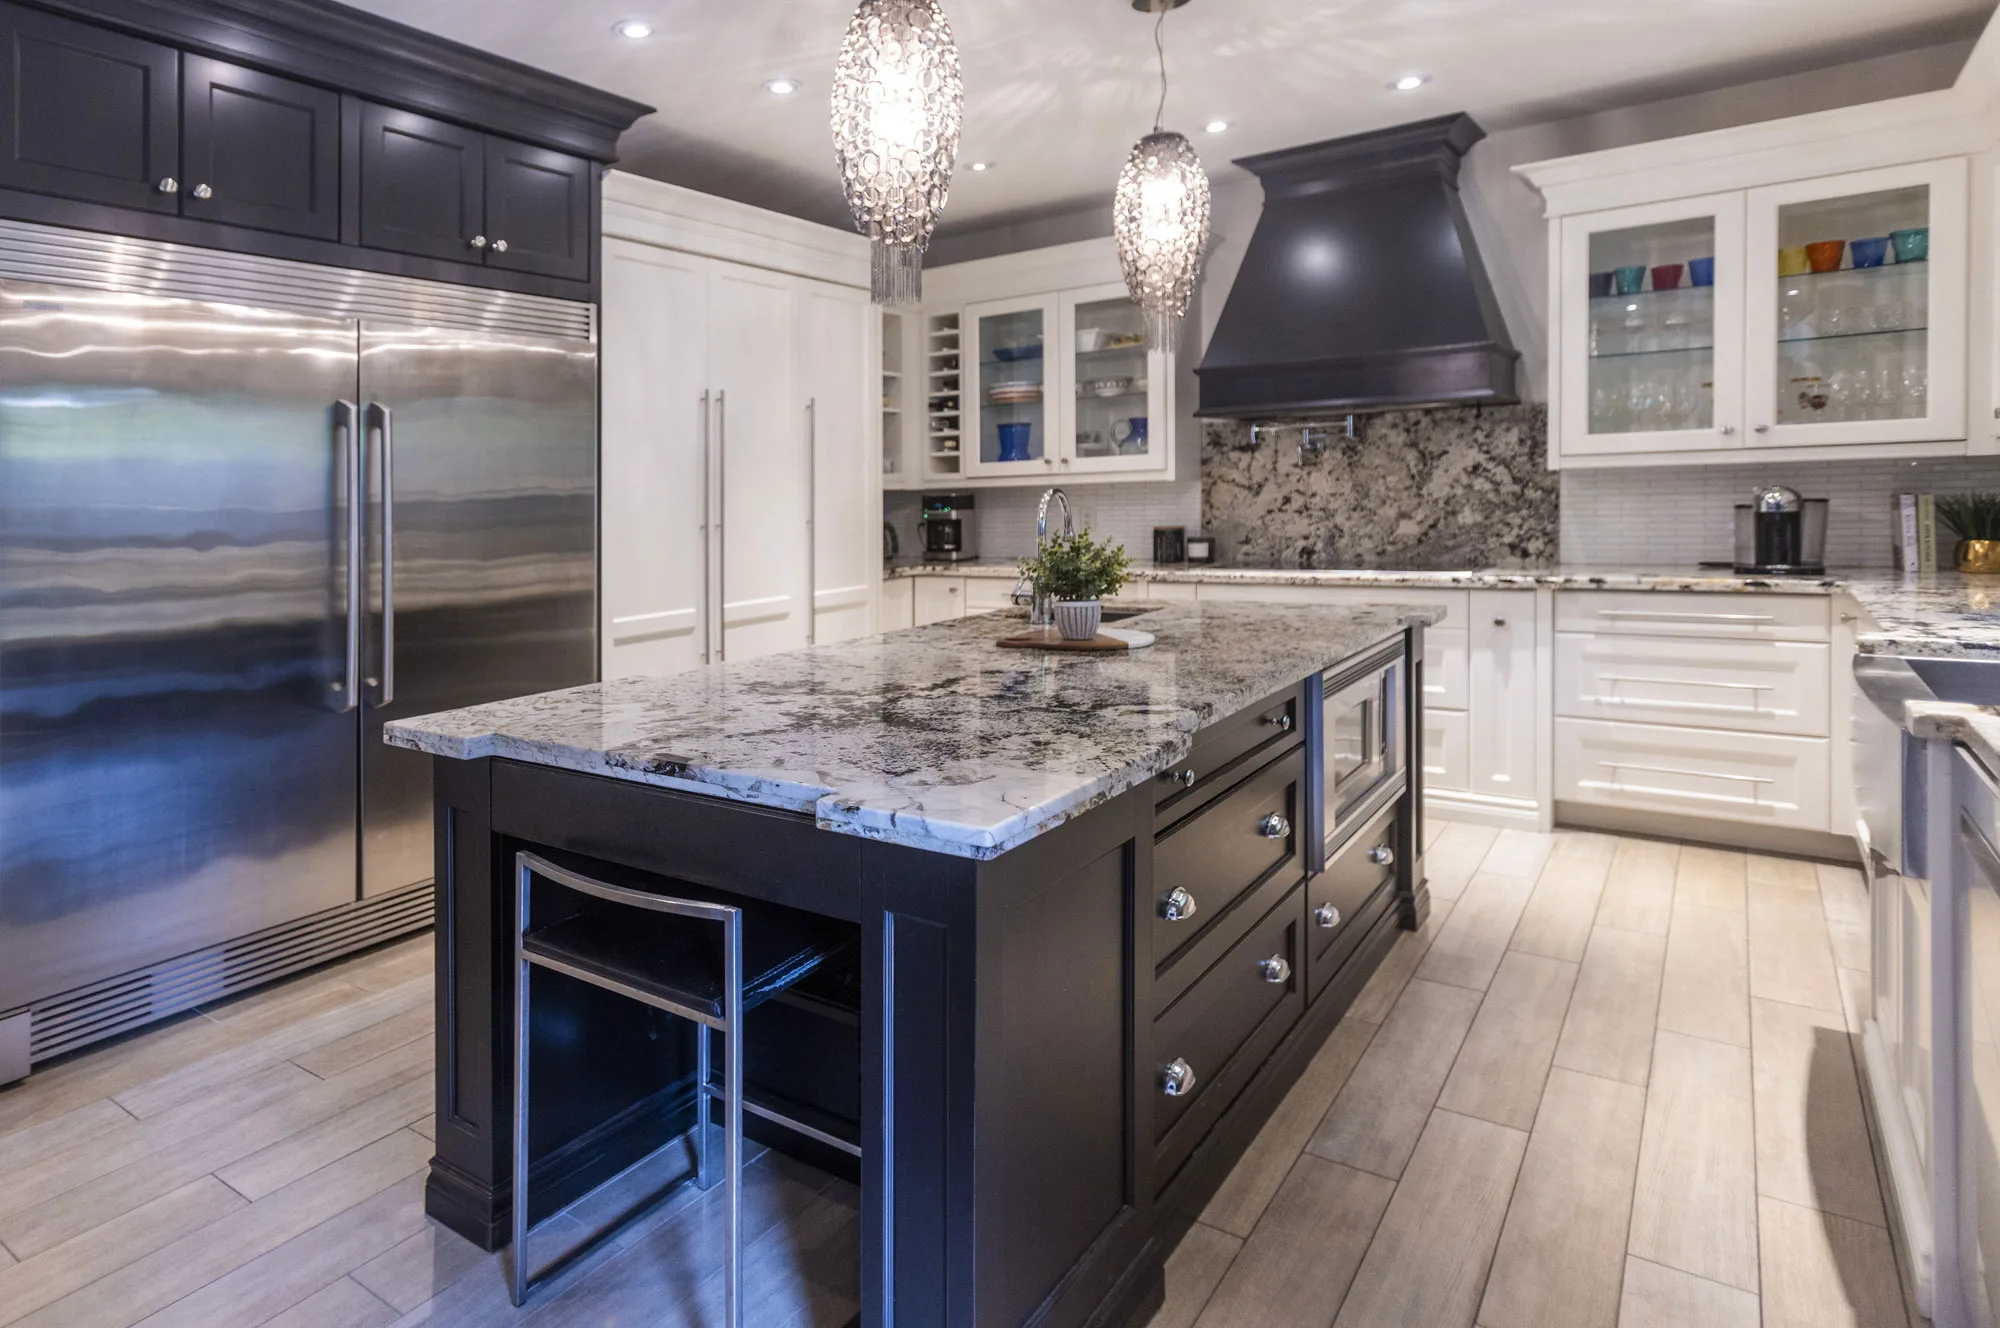 A kitchen with white cabinets and grey and black speckled granite counter top and back splash. Mixed with Dark blue cabinets with